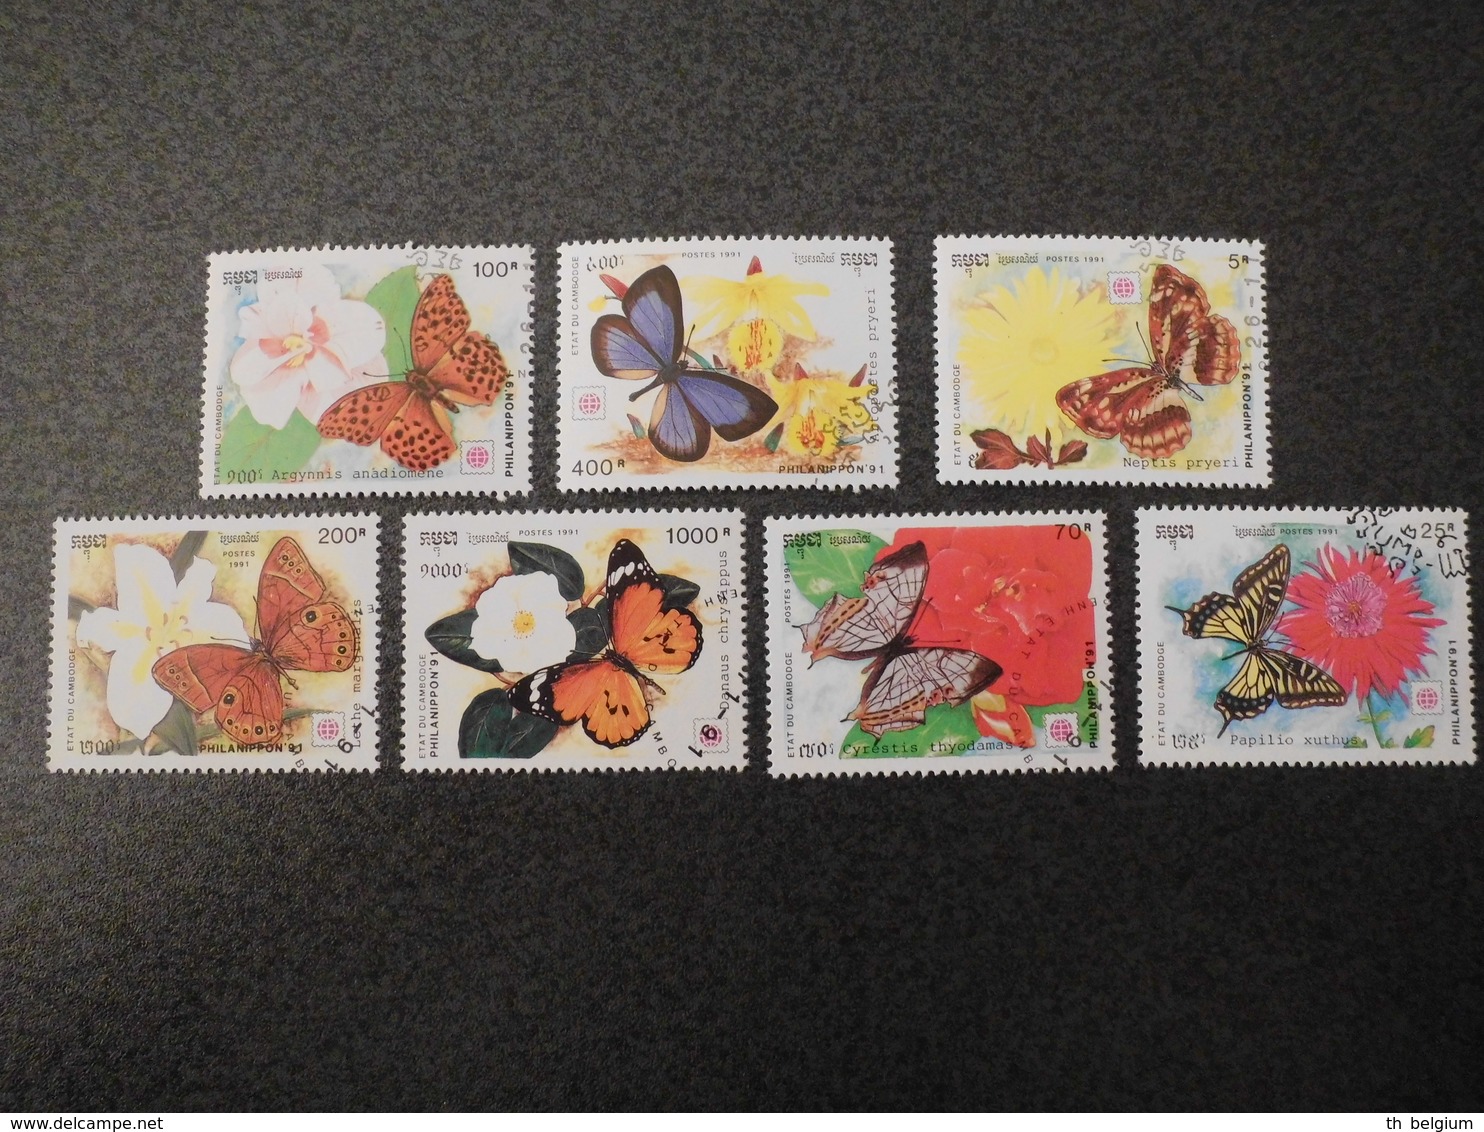 Stamps Of The World: Cambodia Cambodge (3 - Butterflies Butterfly) - Cambodge